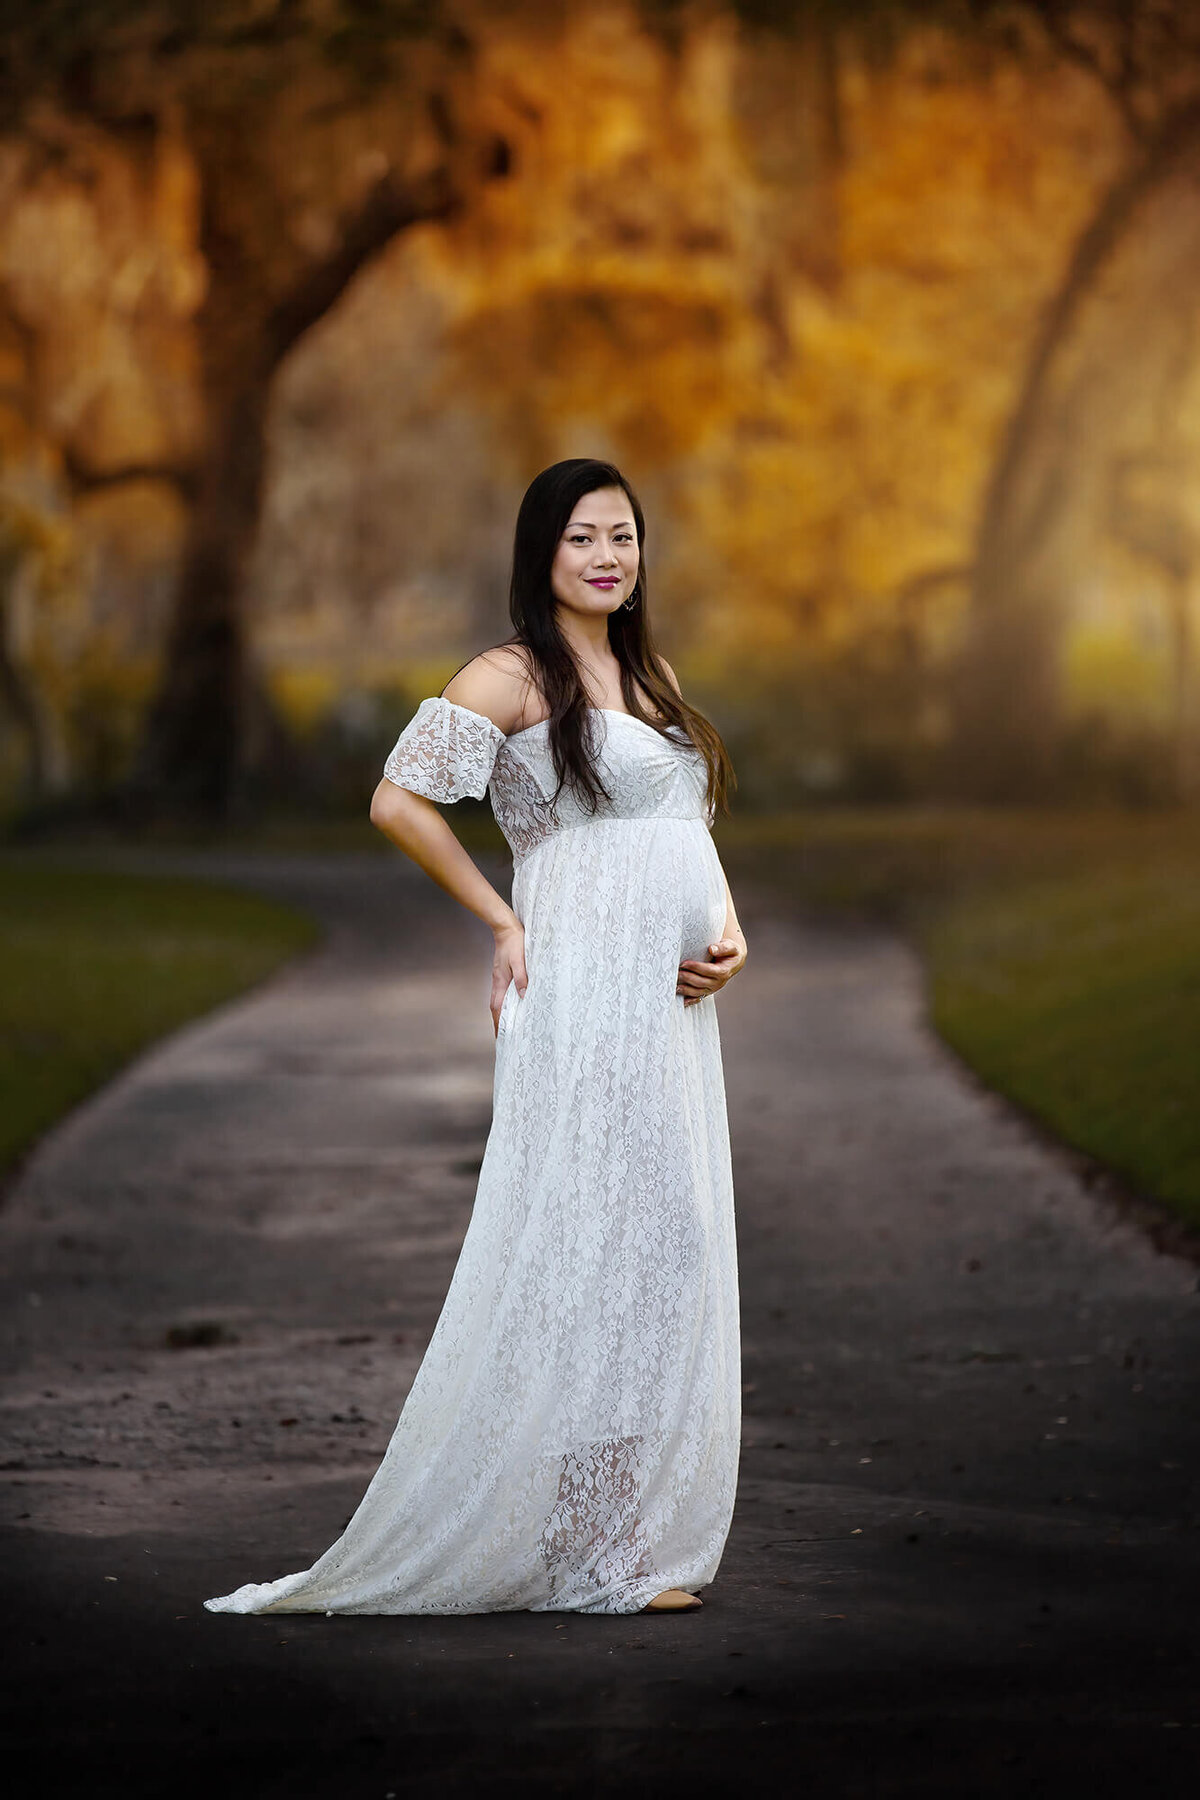 Beautiful pregnant lady with her hand on top of her belly wearing a lace dress with forest and trees in the background.